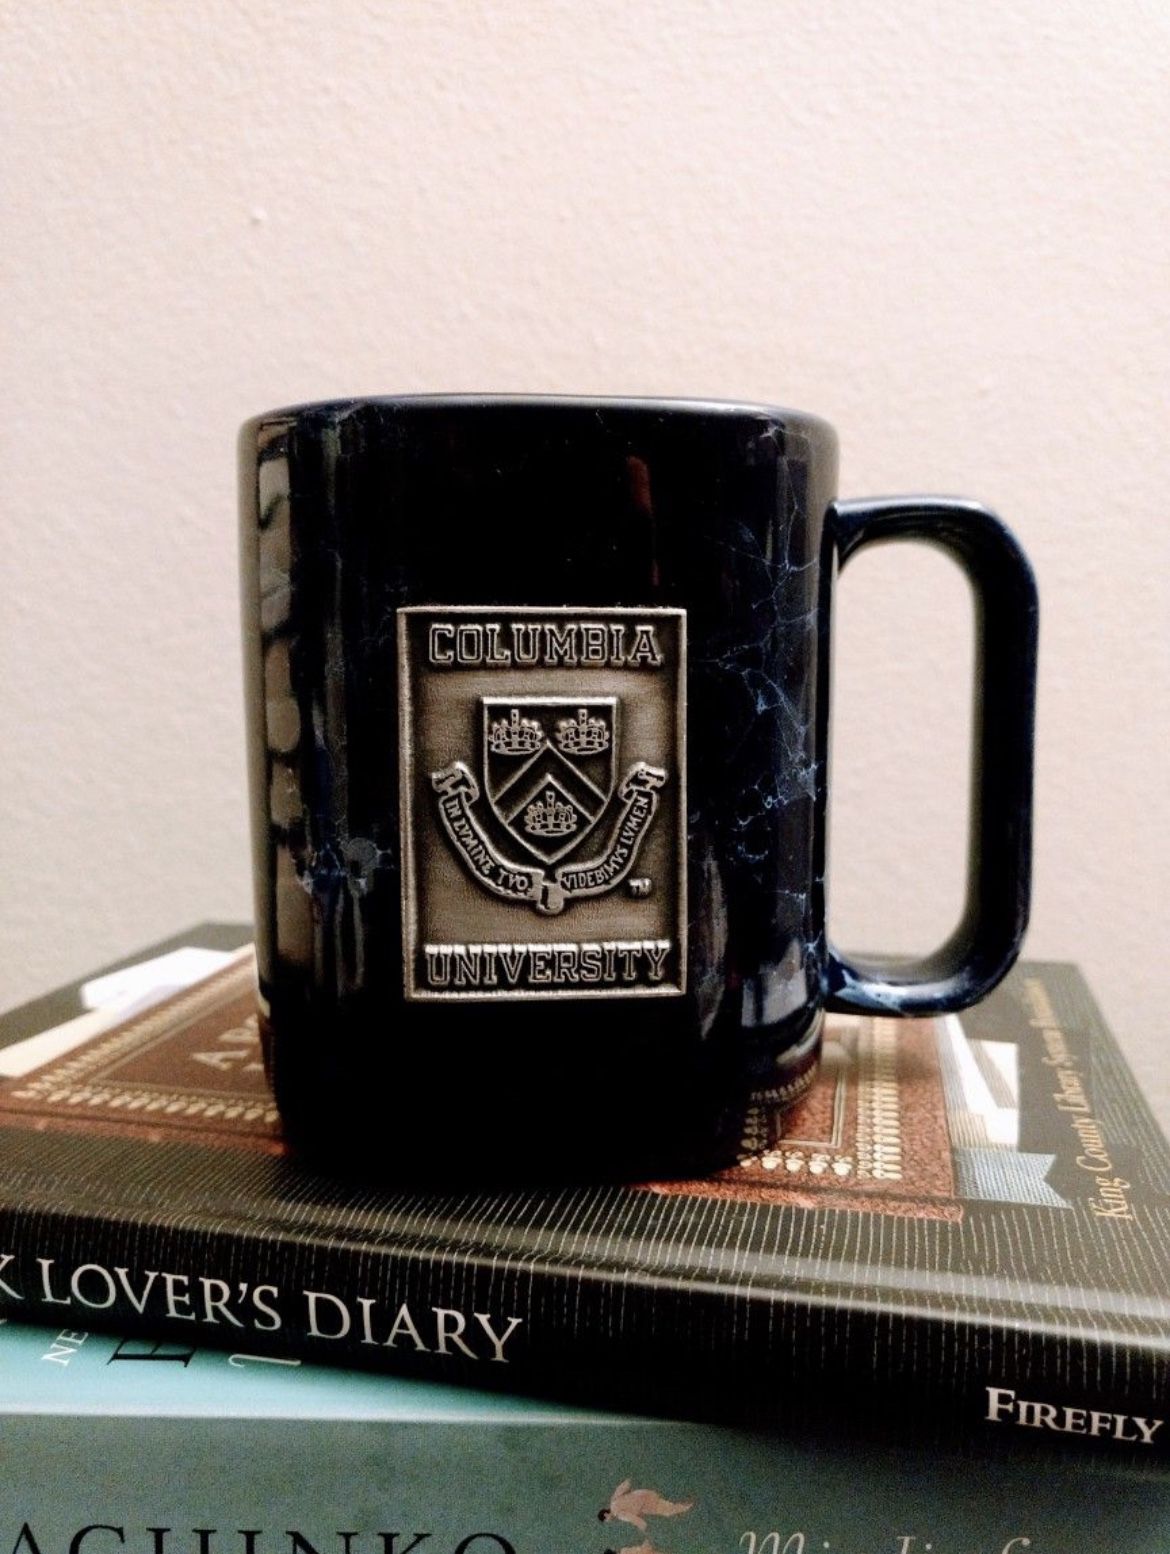 Columbia University Mug (Pick up🛒 In Bellevue) Check Out My Other Posts 🤹🏻‍♂️